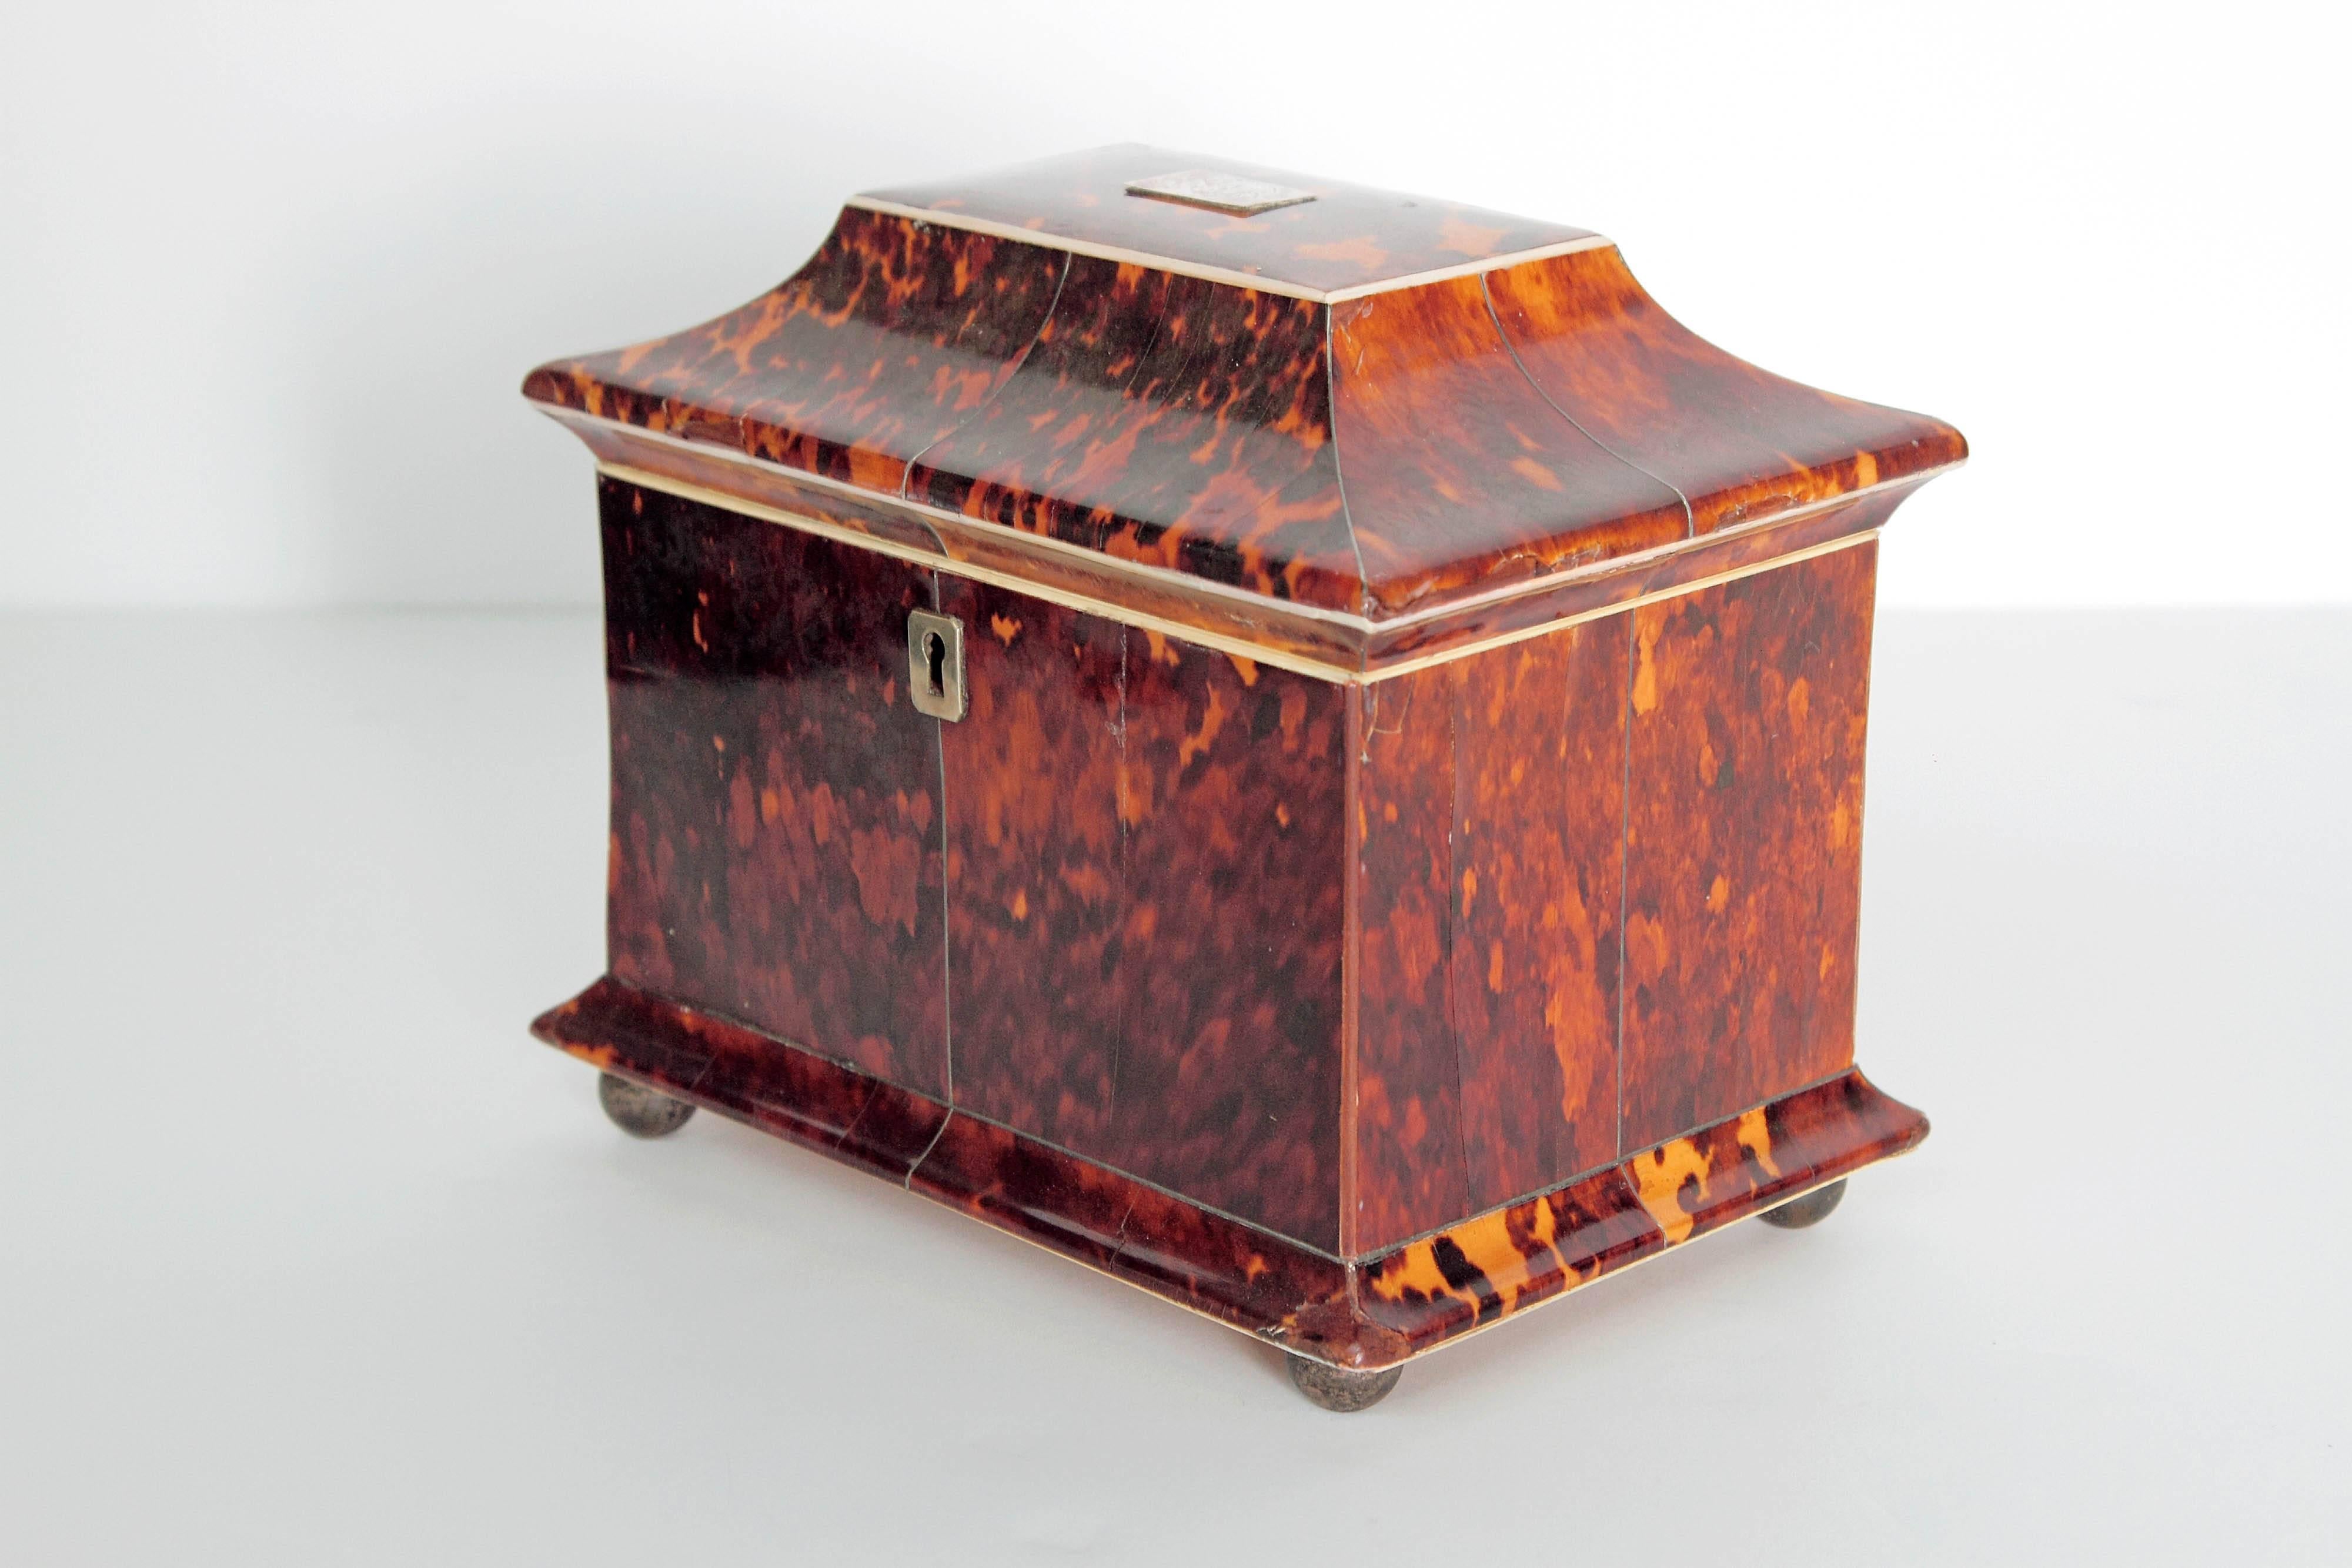 19th century English tortoise shell tea caddy with roof-form lid and bun feet. The fitted interior with two unlined compartments for tea, each lid is tortoise with bone pulls. Interior base and lid are both lined with bone. The lid with green velvet